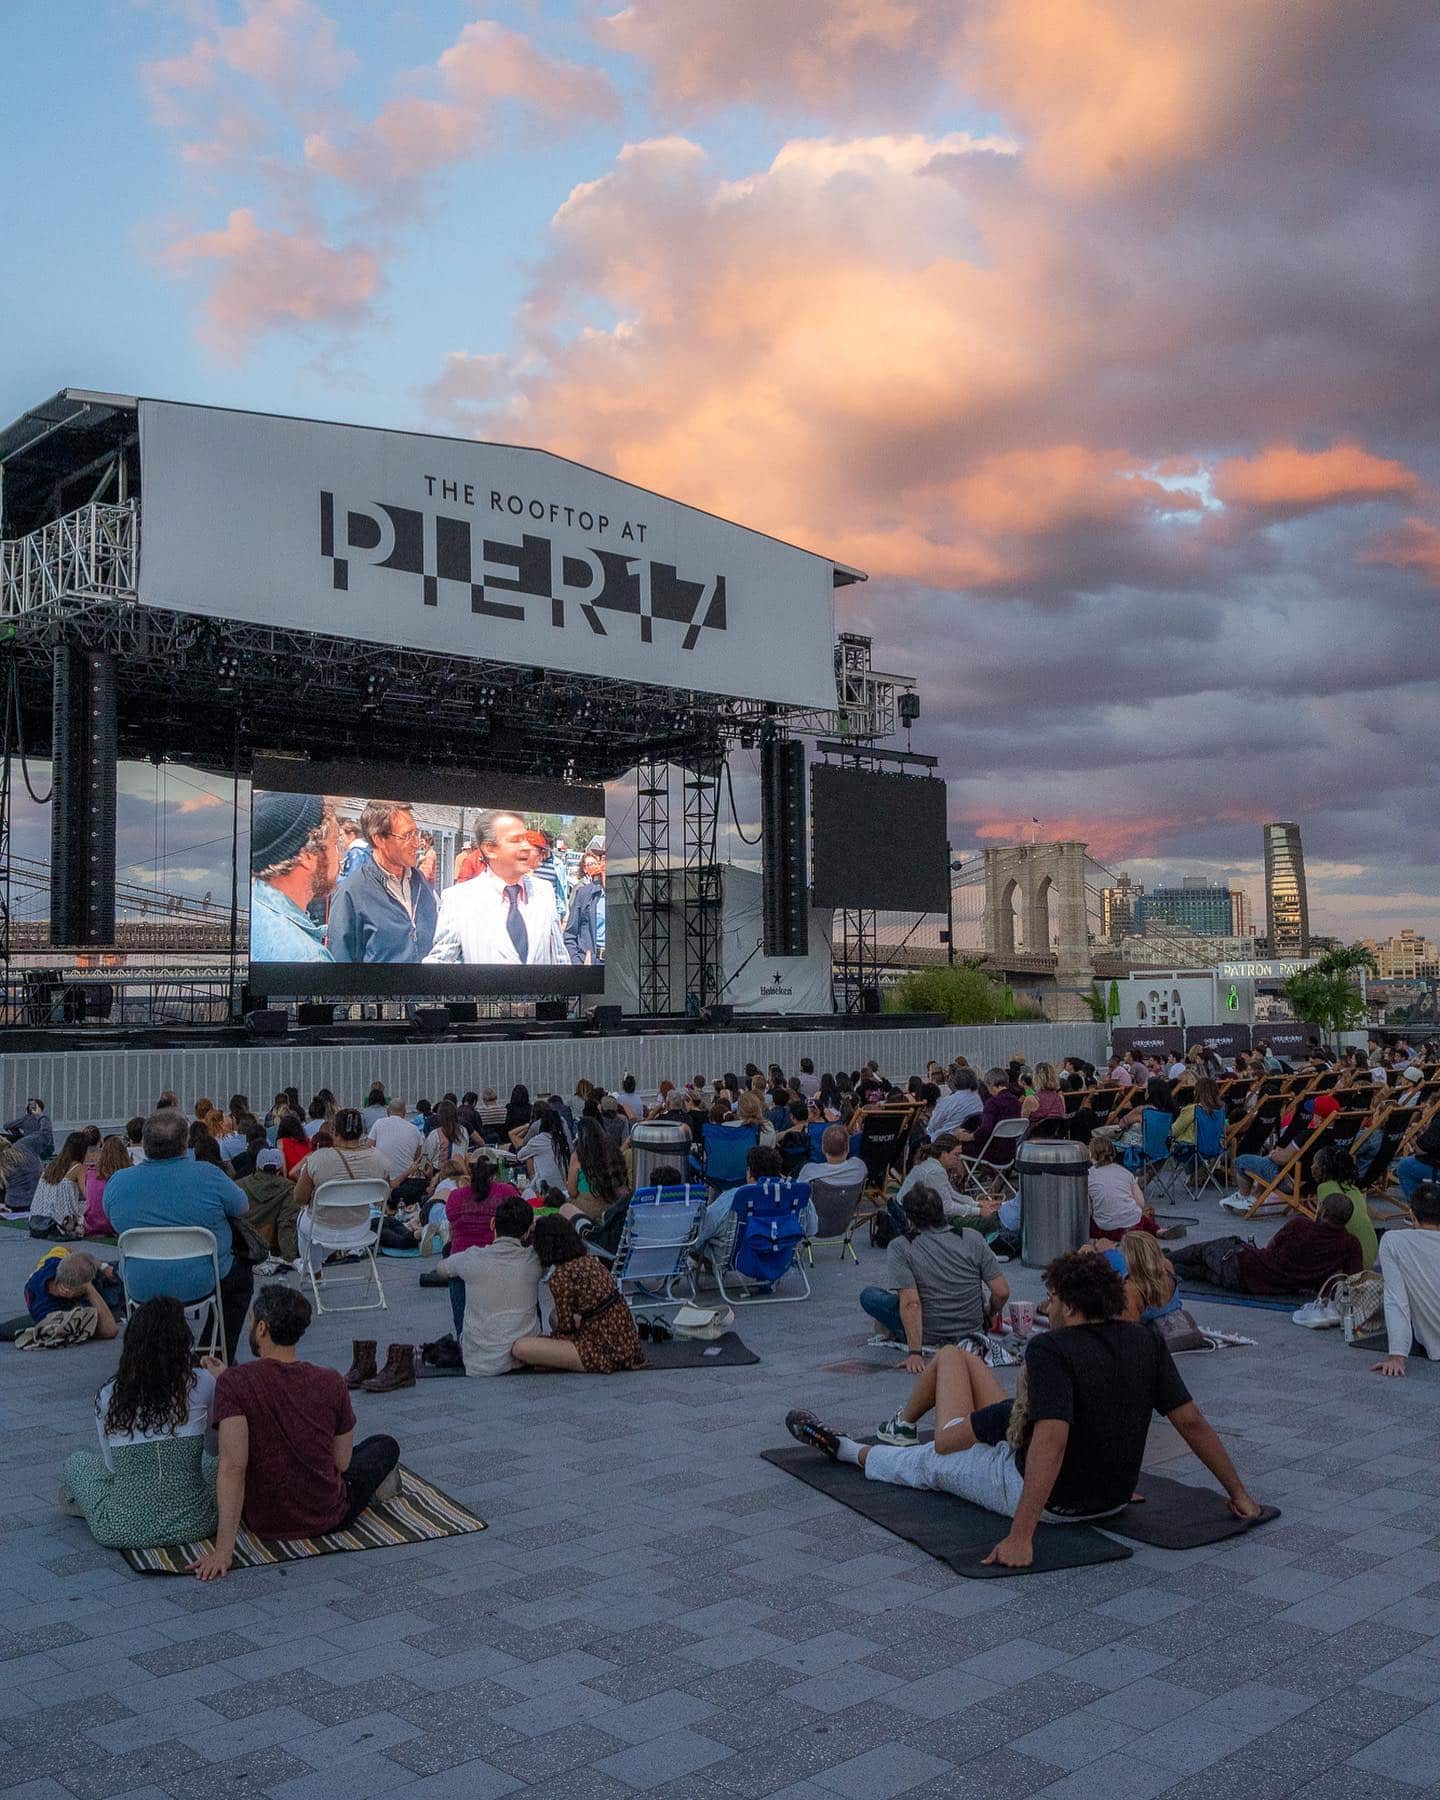 For Film Buffs. For Families. For Downtown. For All  Get ready for the next #SeaportCinema of Pitch Perfect. RSVPs just dropped   7:30pm 🗓️ Thurs, 9/21  The Rooftop at Pier 17 RSVP now ➤ link in bio #TheSeaport Space is limited. Early to save your spot. Doors open at 6:30pm. Guests are permitted to bring their own blankets & chairs.